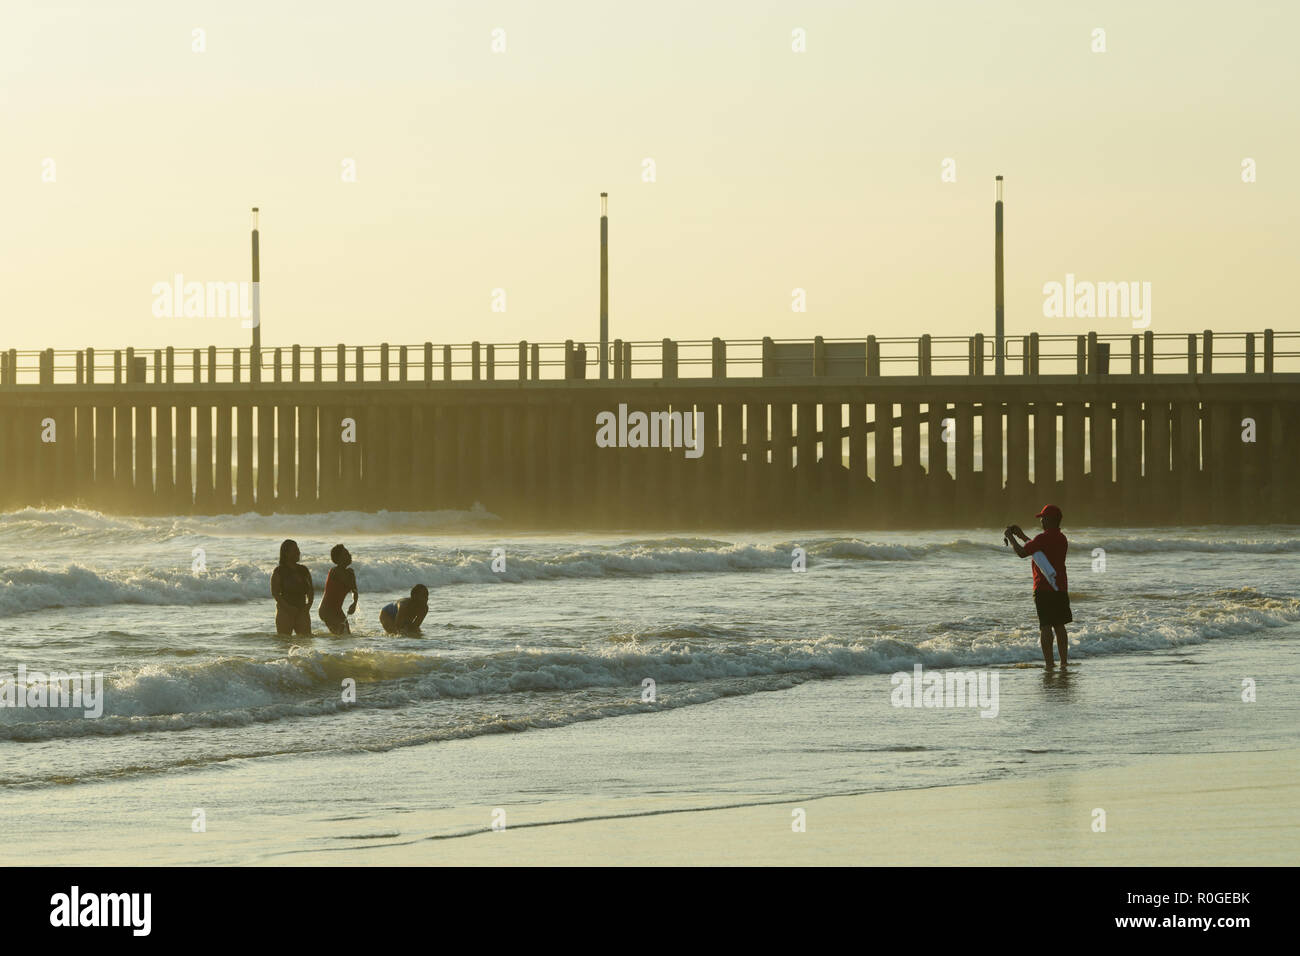 Durban, KwaZulu-Natal, South Africa, single adult male photographing group of three women bathers standing in sea water enjoying seaside holiday Stock Photo